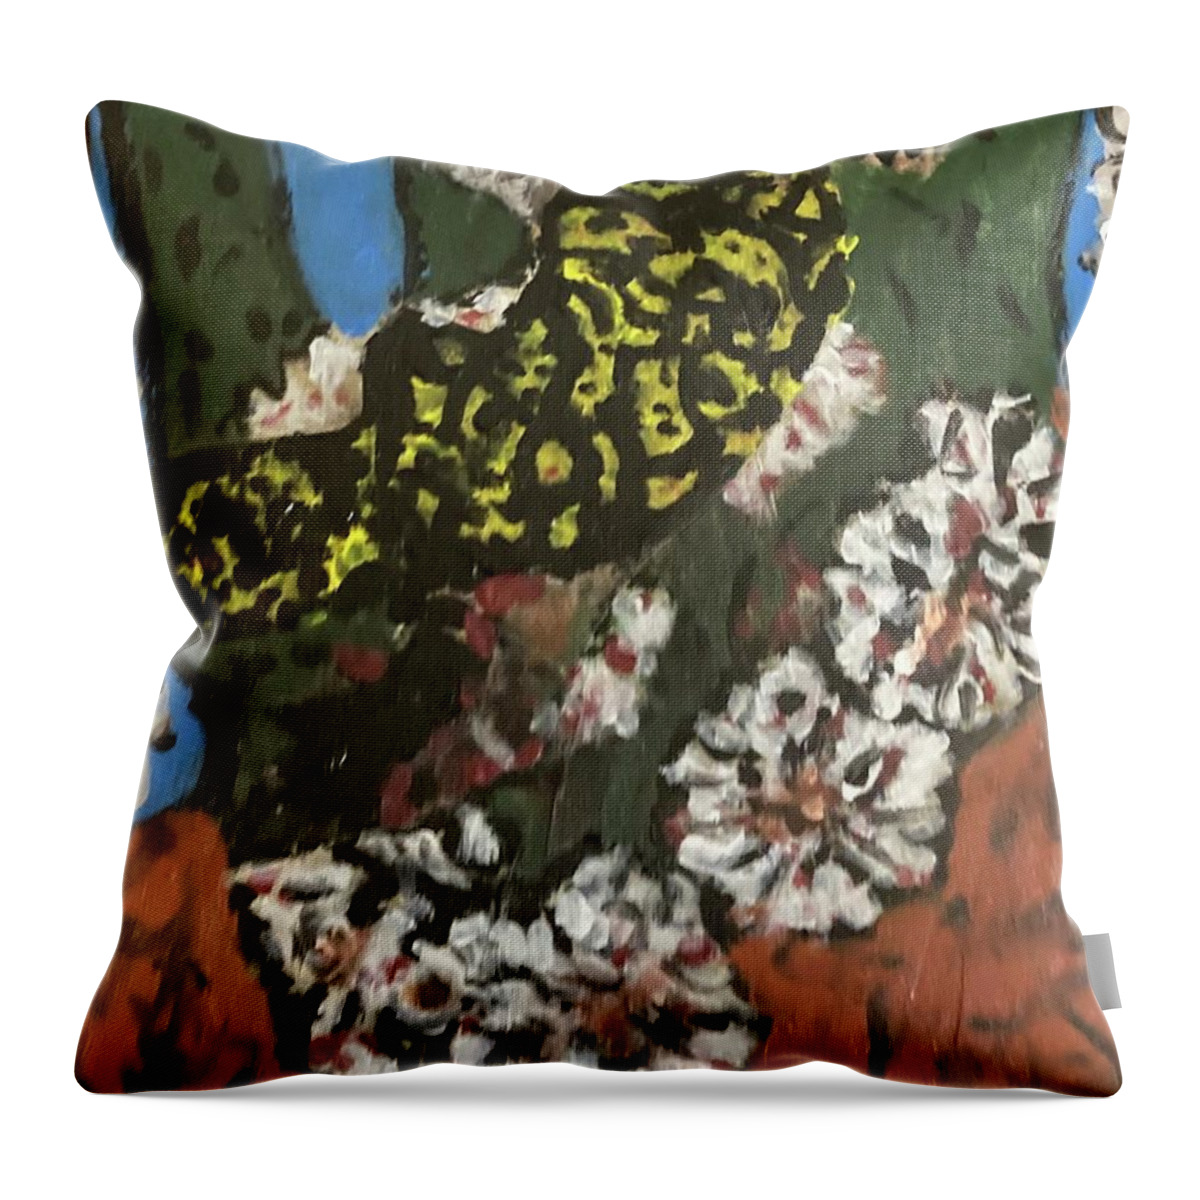 Paintings Of Lizards Throw Pillow featuring the mixed media Yellow lizard Cactus Flowers by Bencasso Barnesquiat